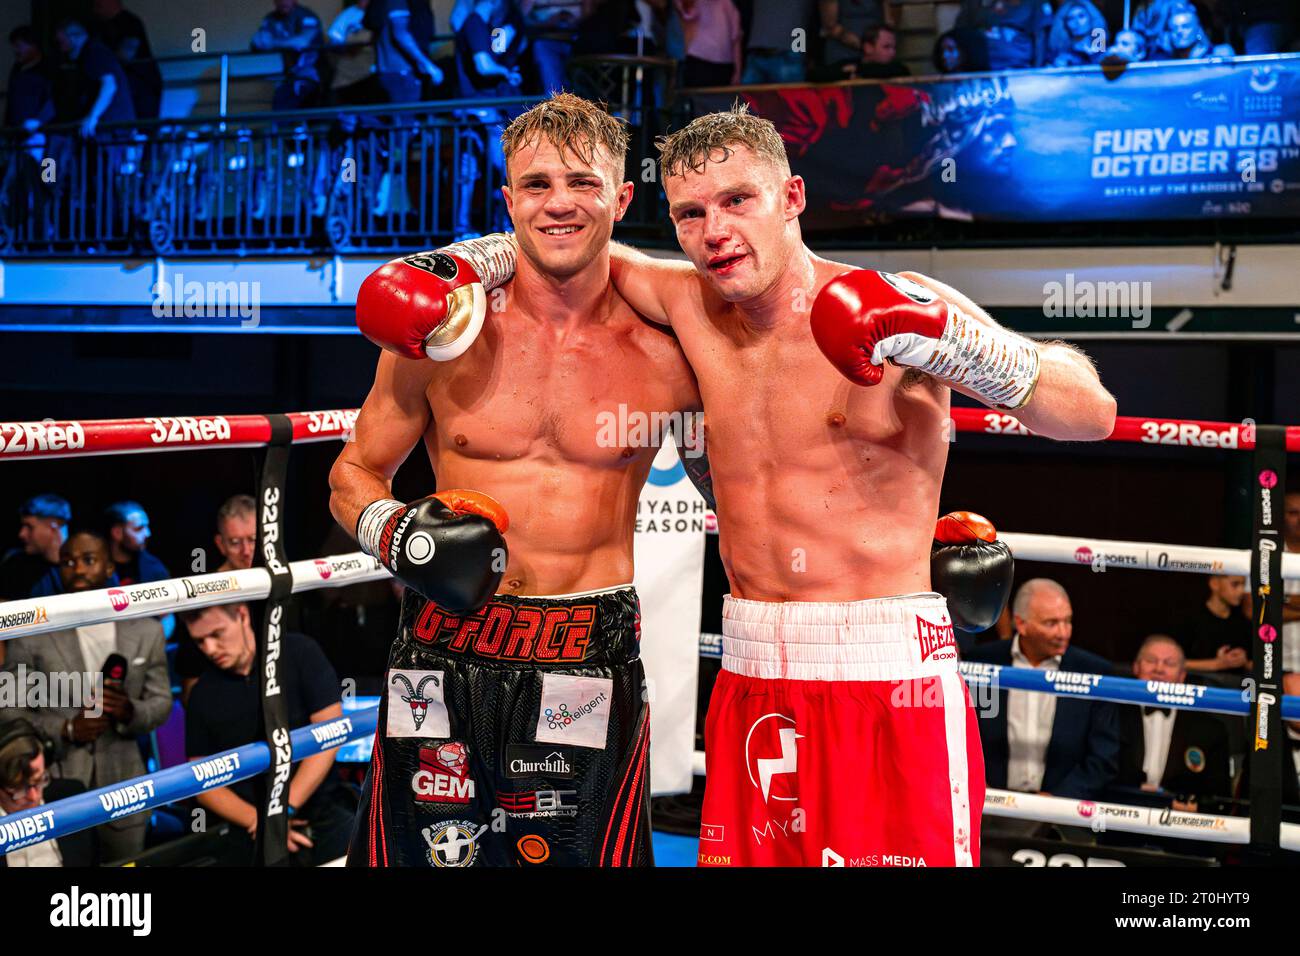 LONDON, UNITED KINGDOM. 06 Oct, 23. Joshua Frankham vs George Davey - Rounds Super-Welterweight Contest  during Zorro vs D'Ortenzi Fight Night and undercards at York Hall on Friday, October 06, 2023 in LONDON, ENGLAND. Credit: Taka G Wu/Alamy Live News Stock Photo